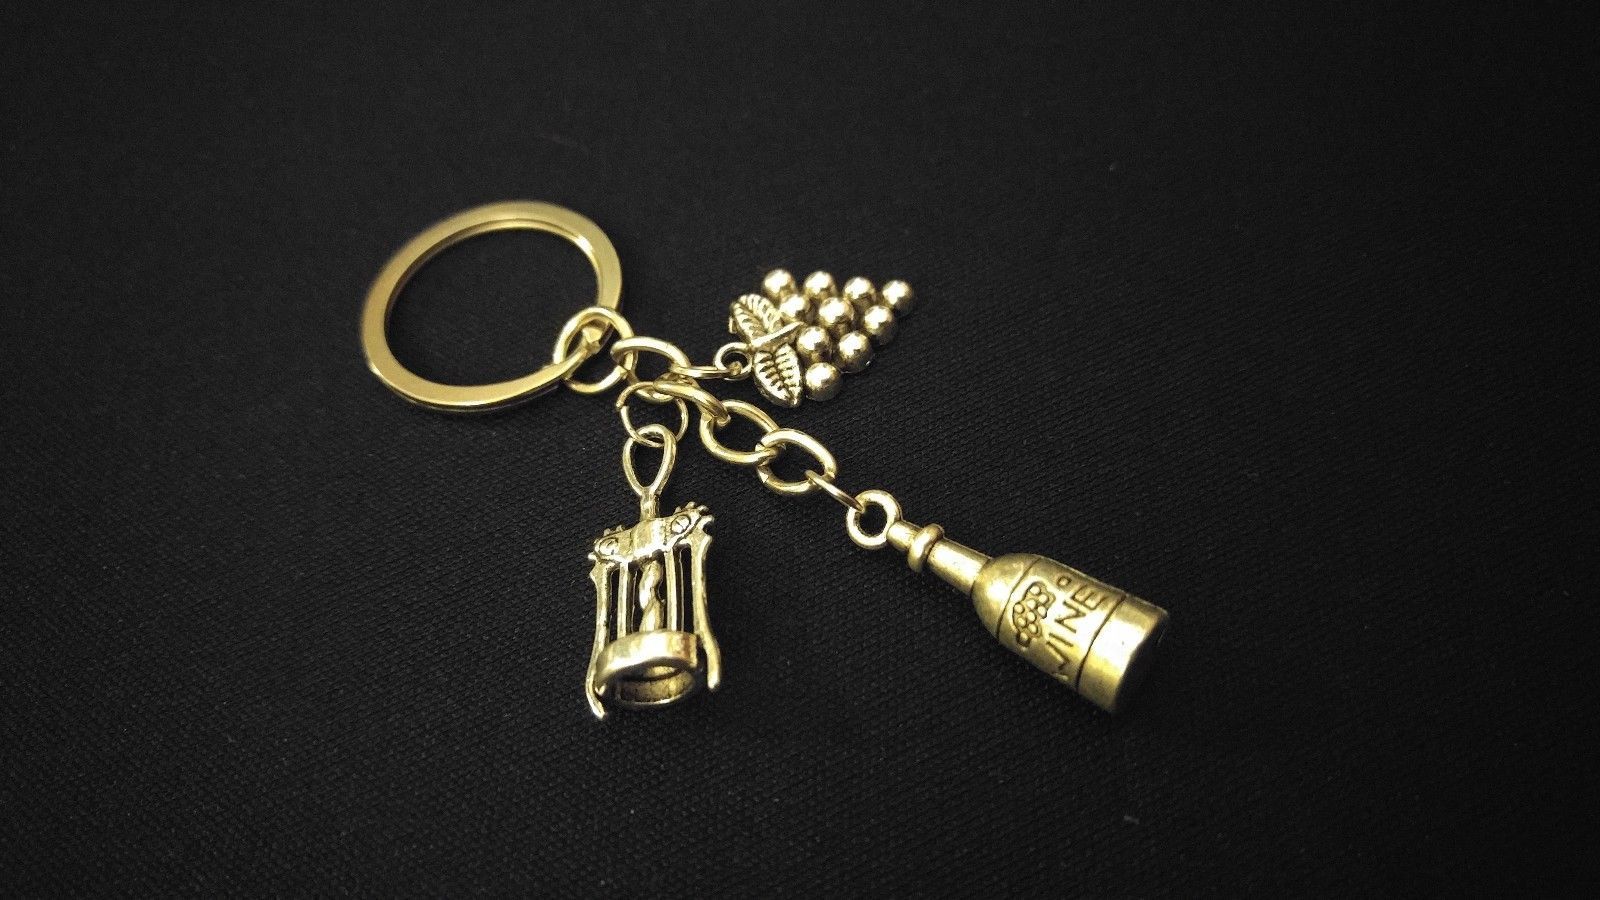 WINE Bottle Grapes Opener Drink Silver Metal Charm Keychain Key Ring Gift USA